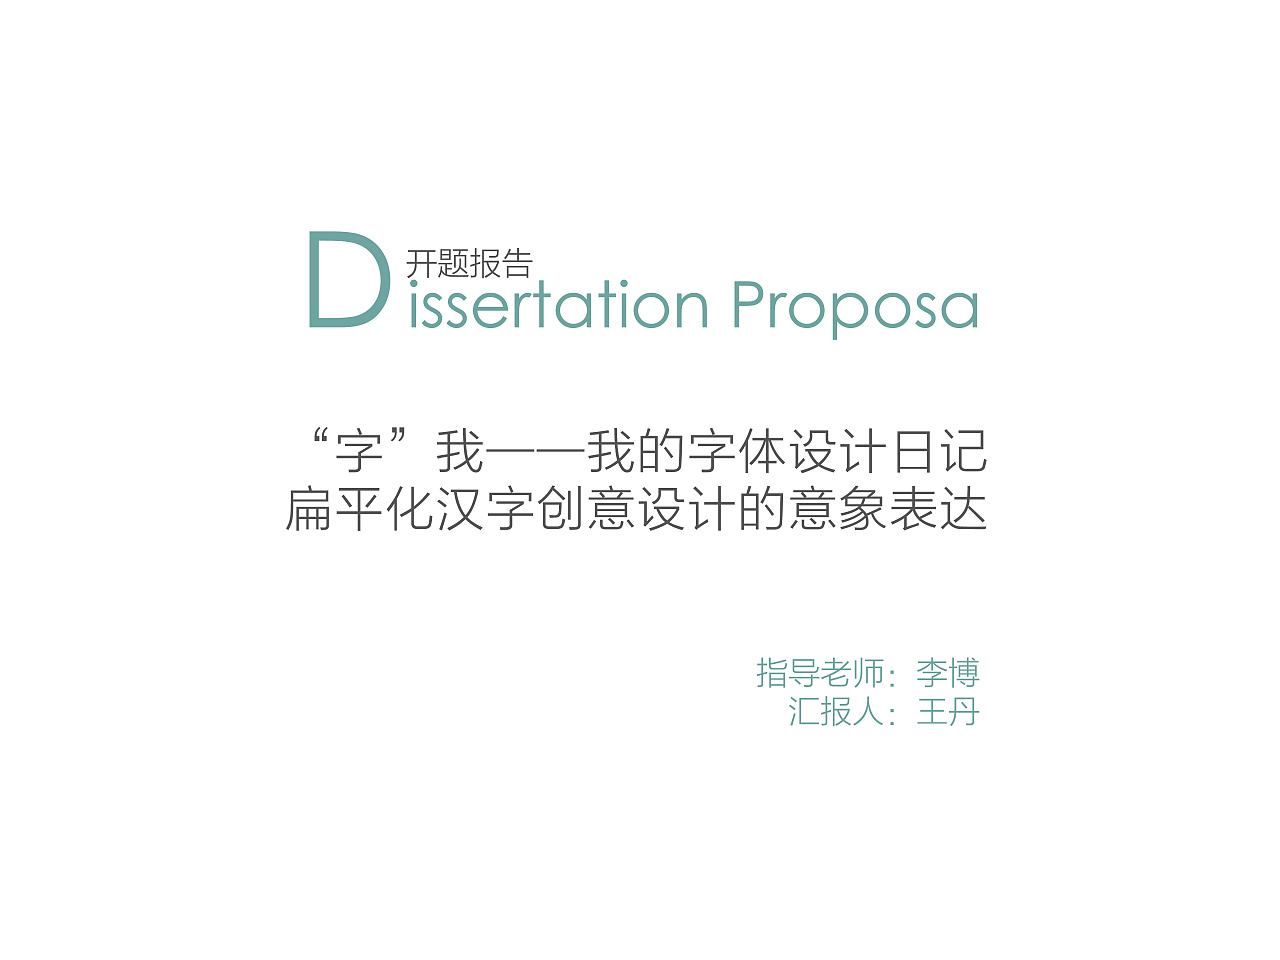 Opening report PPT - the image expression of the creative design of flat Chinese characters